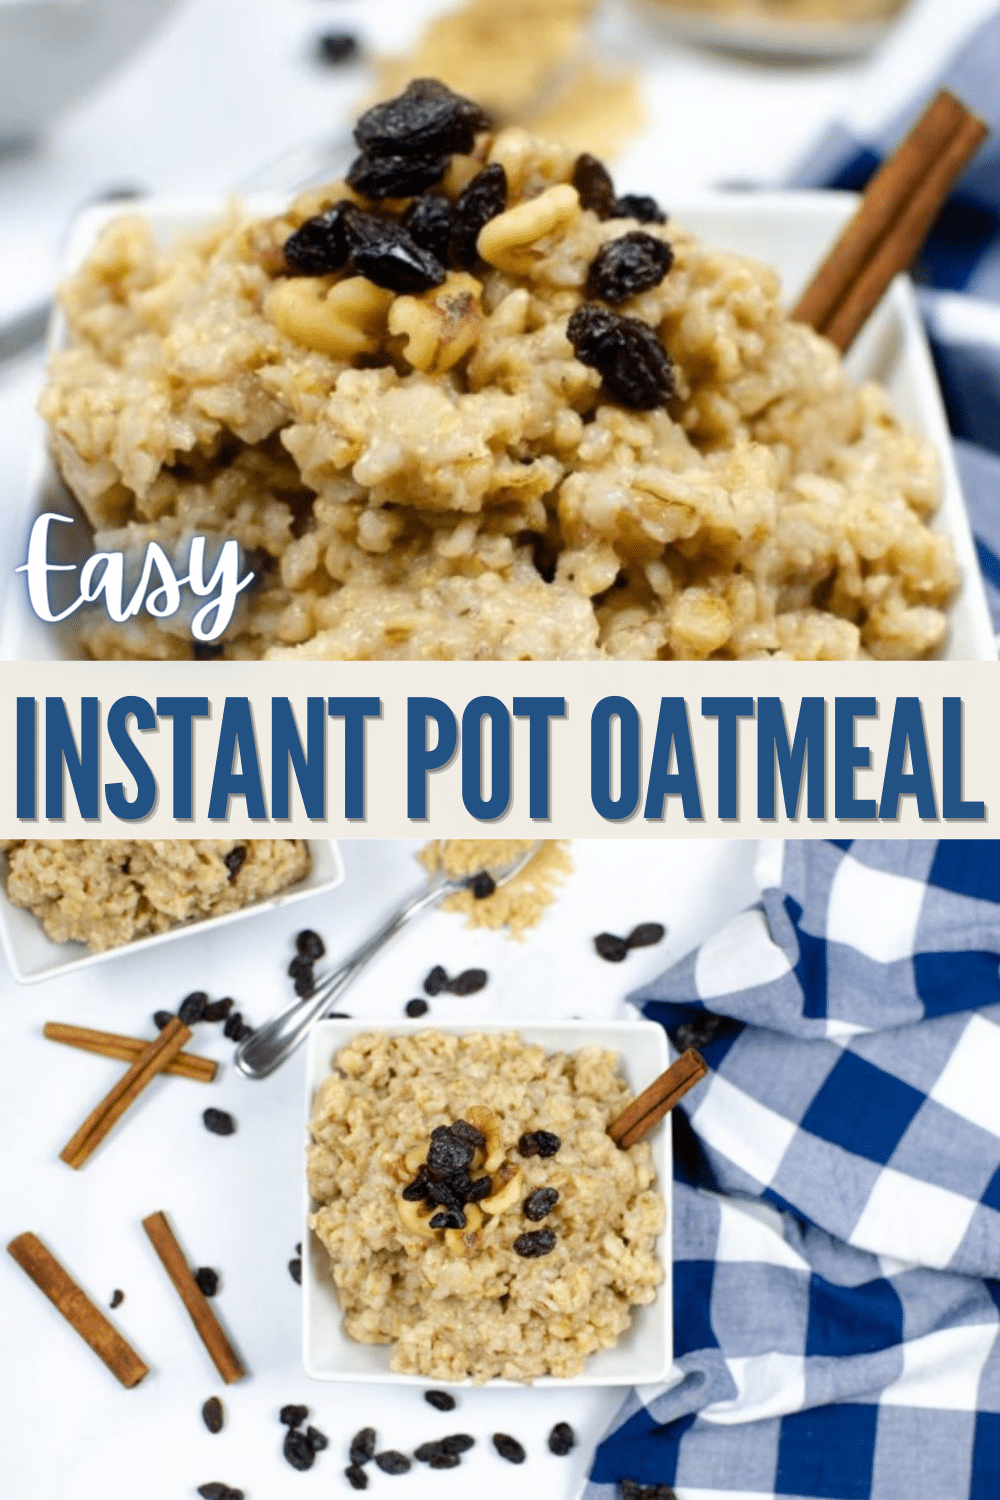 Instant Pot Oatmeal is perfect for busy mornings! This easy recipe cooks while you get ready for the day, making your morning less stressful. #instantpot #pressurecooker #oatmeal #breakfast #recipe via @wondermomwannab